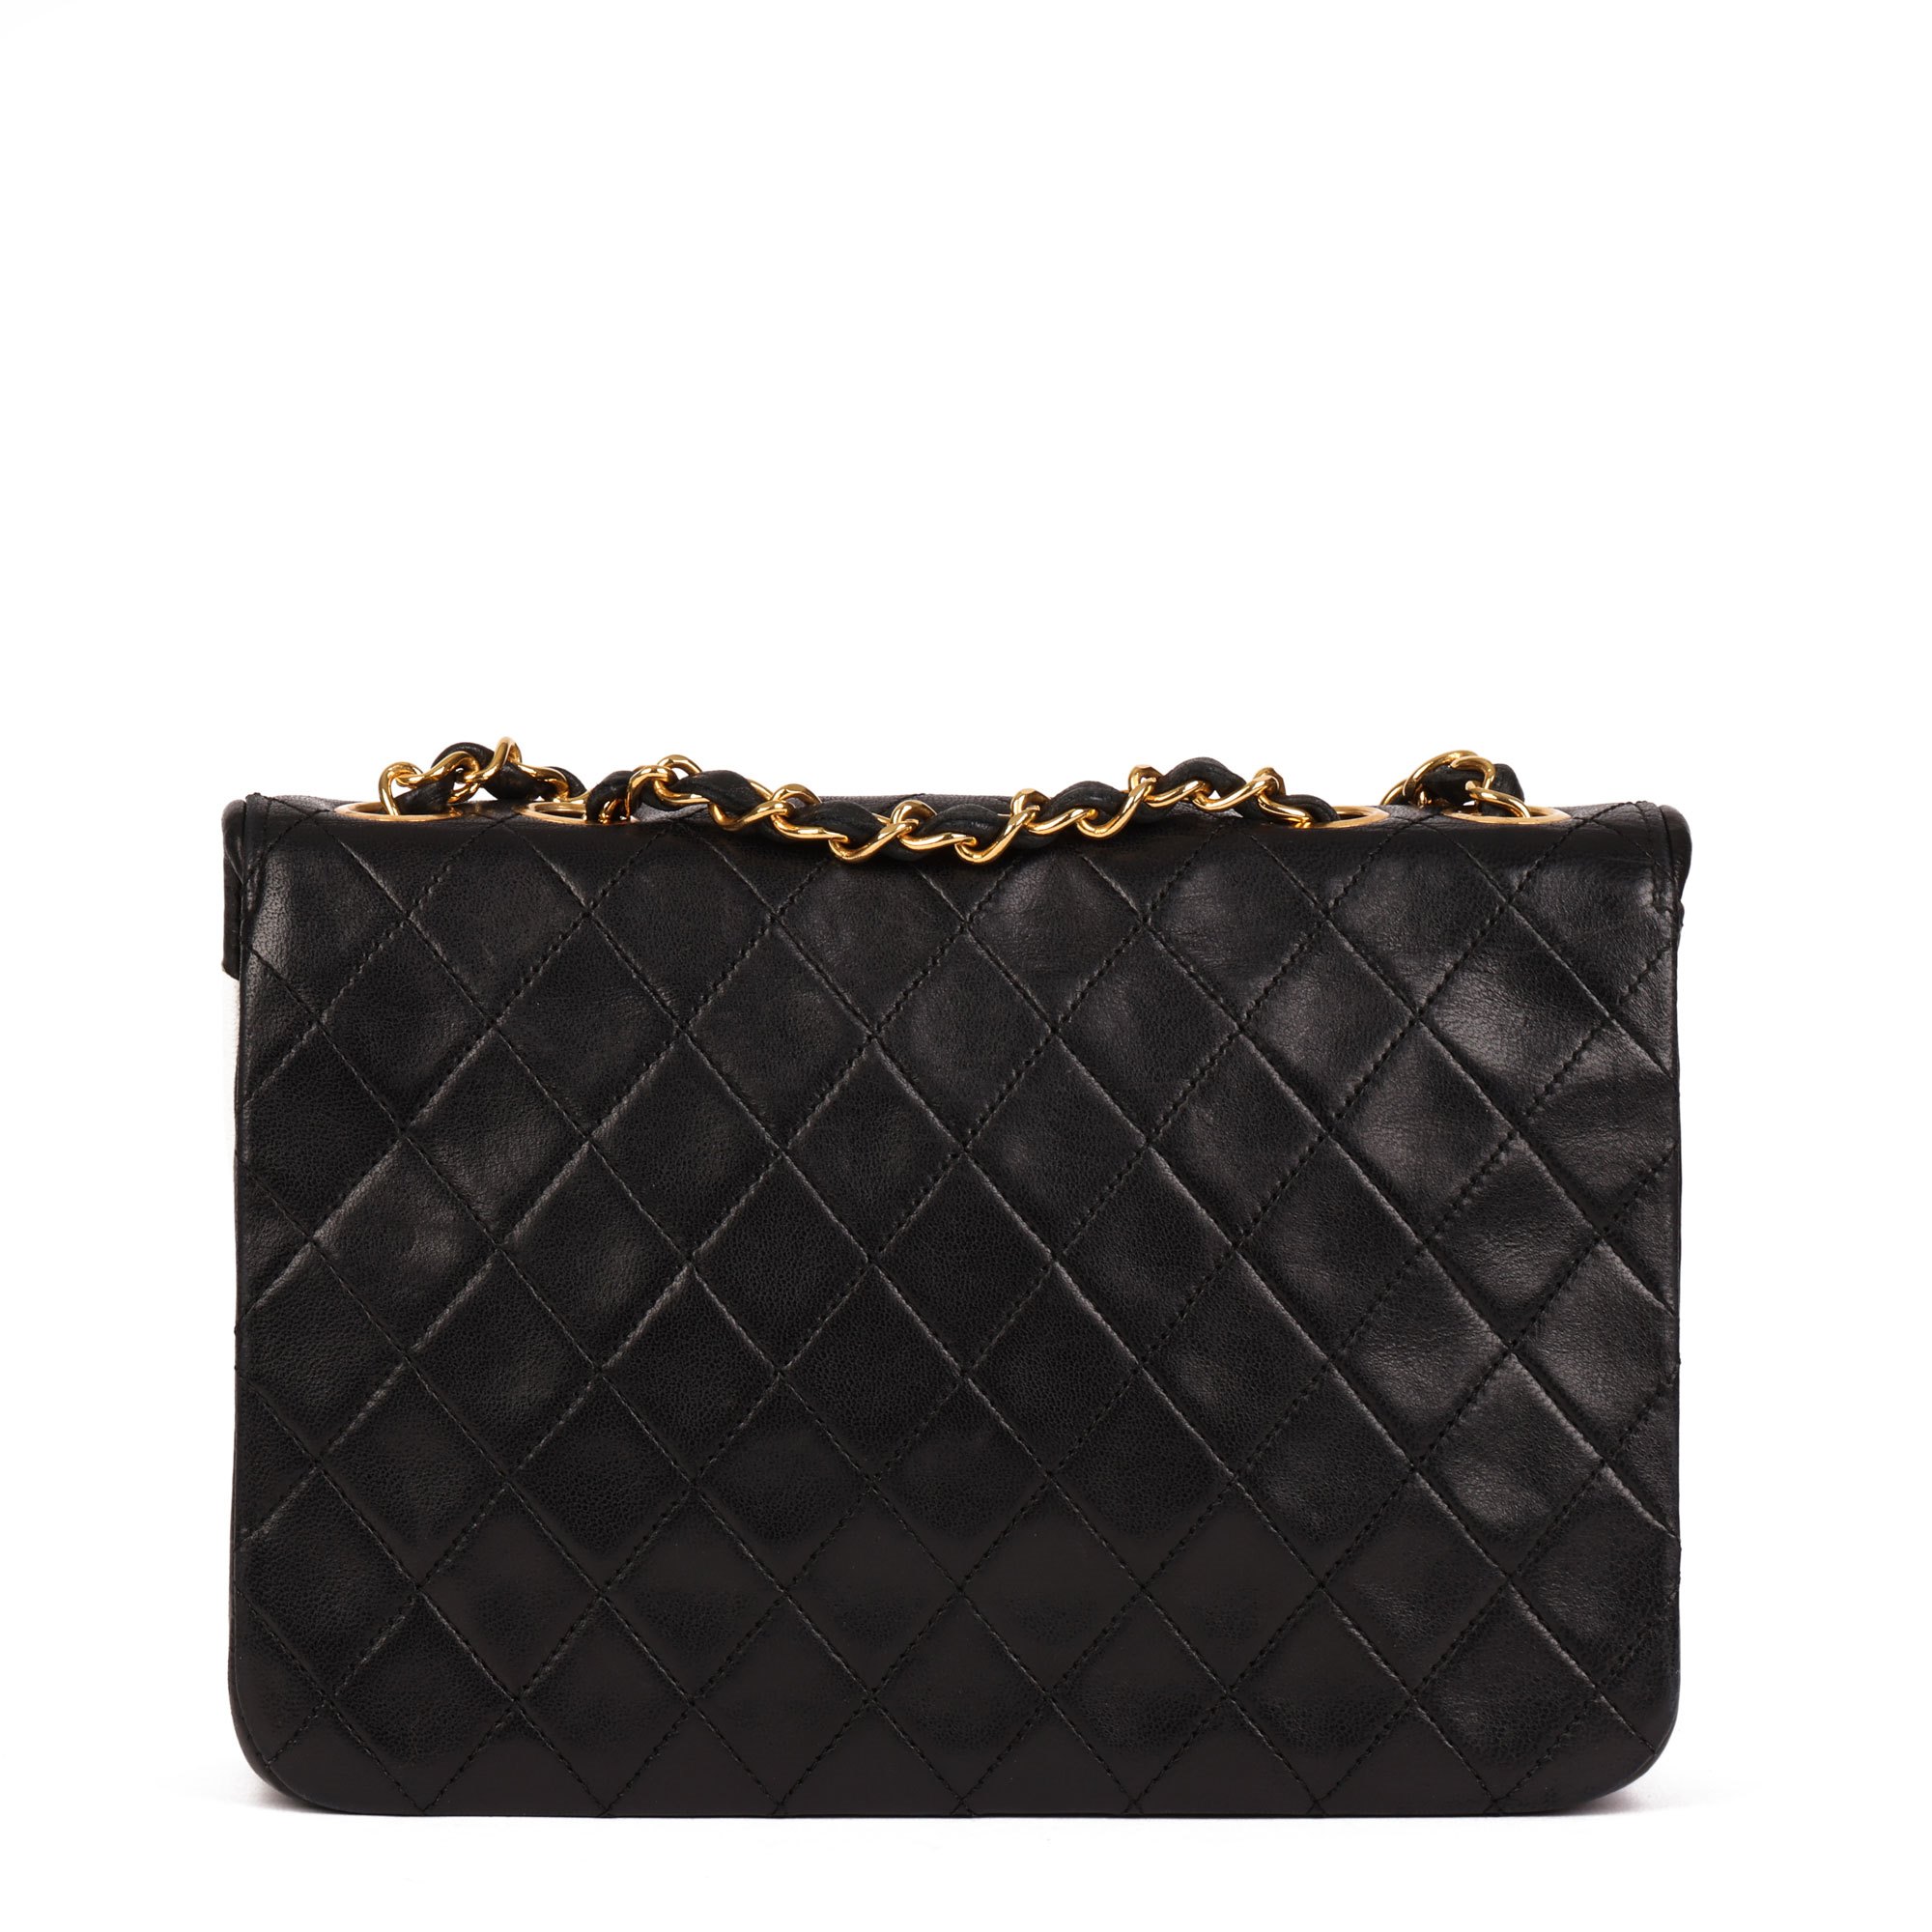 Chanel Black Quilted Lambskin Vintage Small Classic Single Flap Bag with White Trim